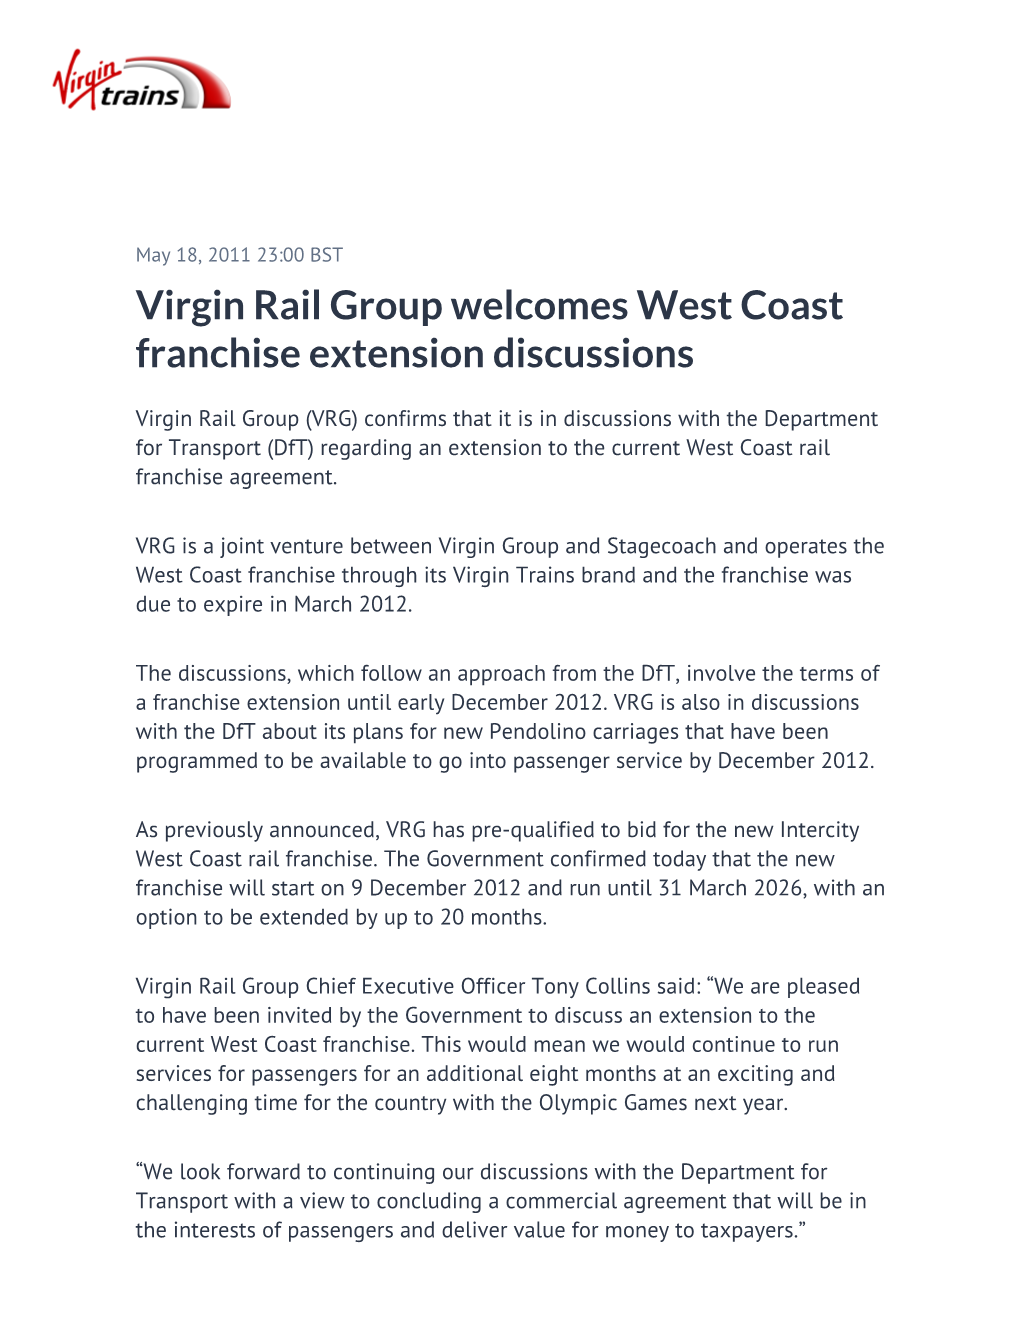 Virgin Rail Group Welcomes West Coast Franchise Extension Discussions